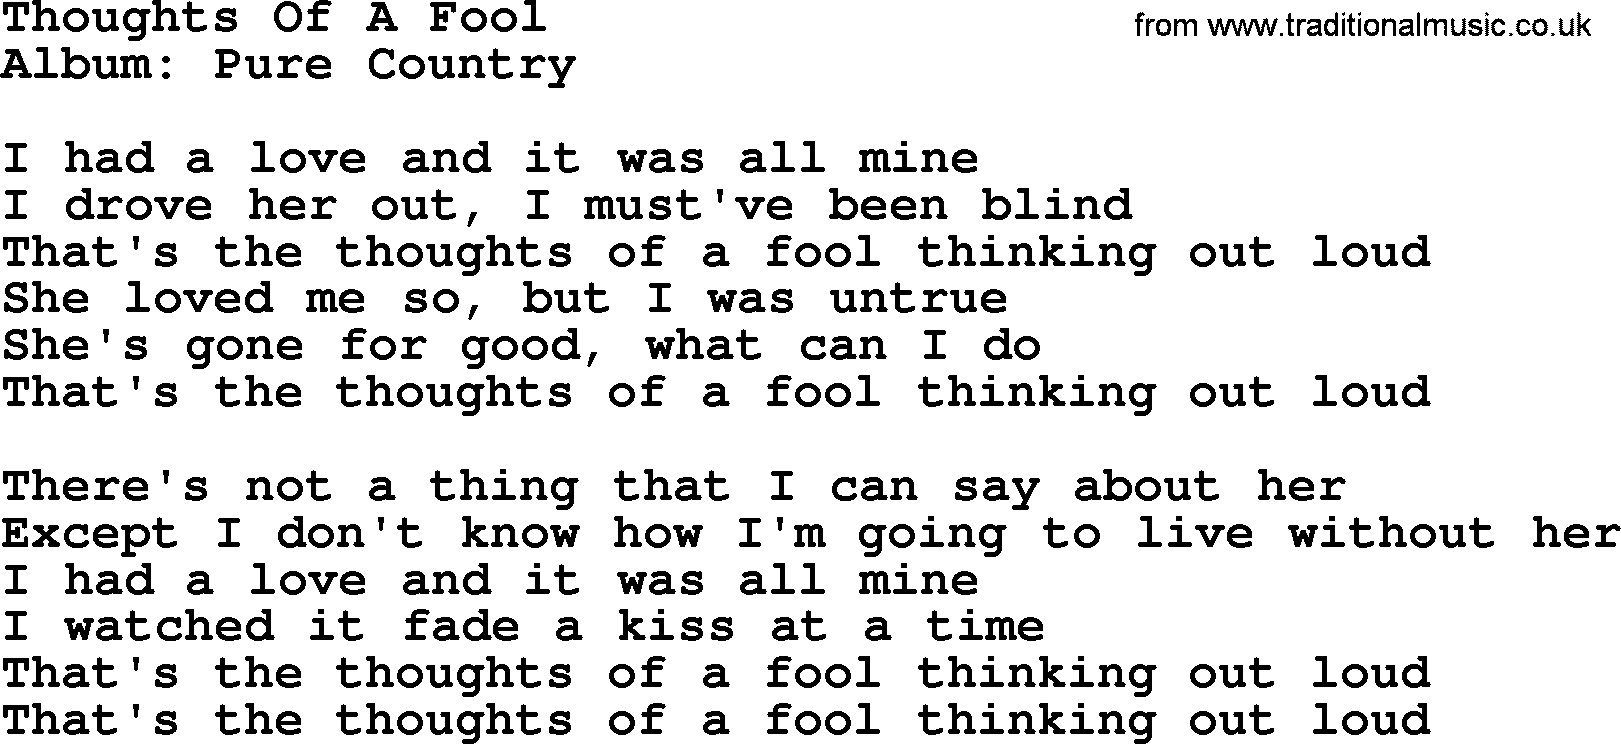 George Strait song: Thoughts Of A Fool, lyrics